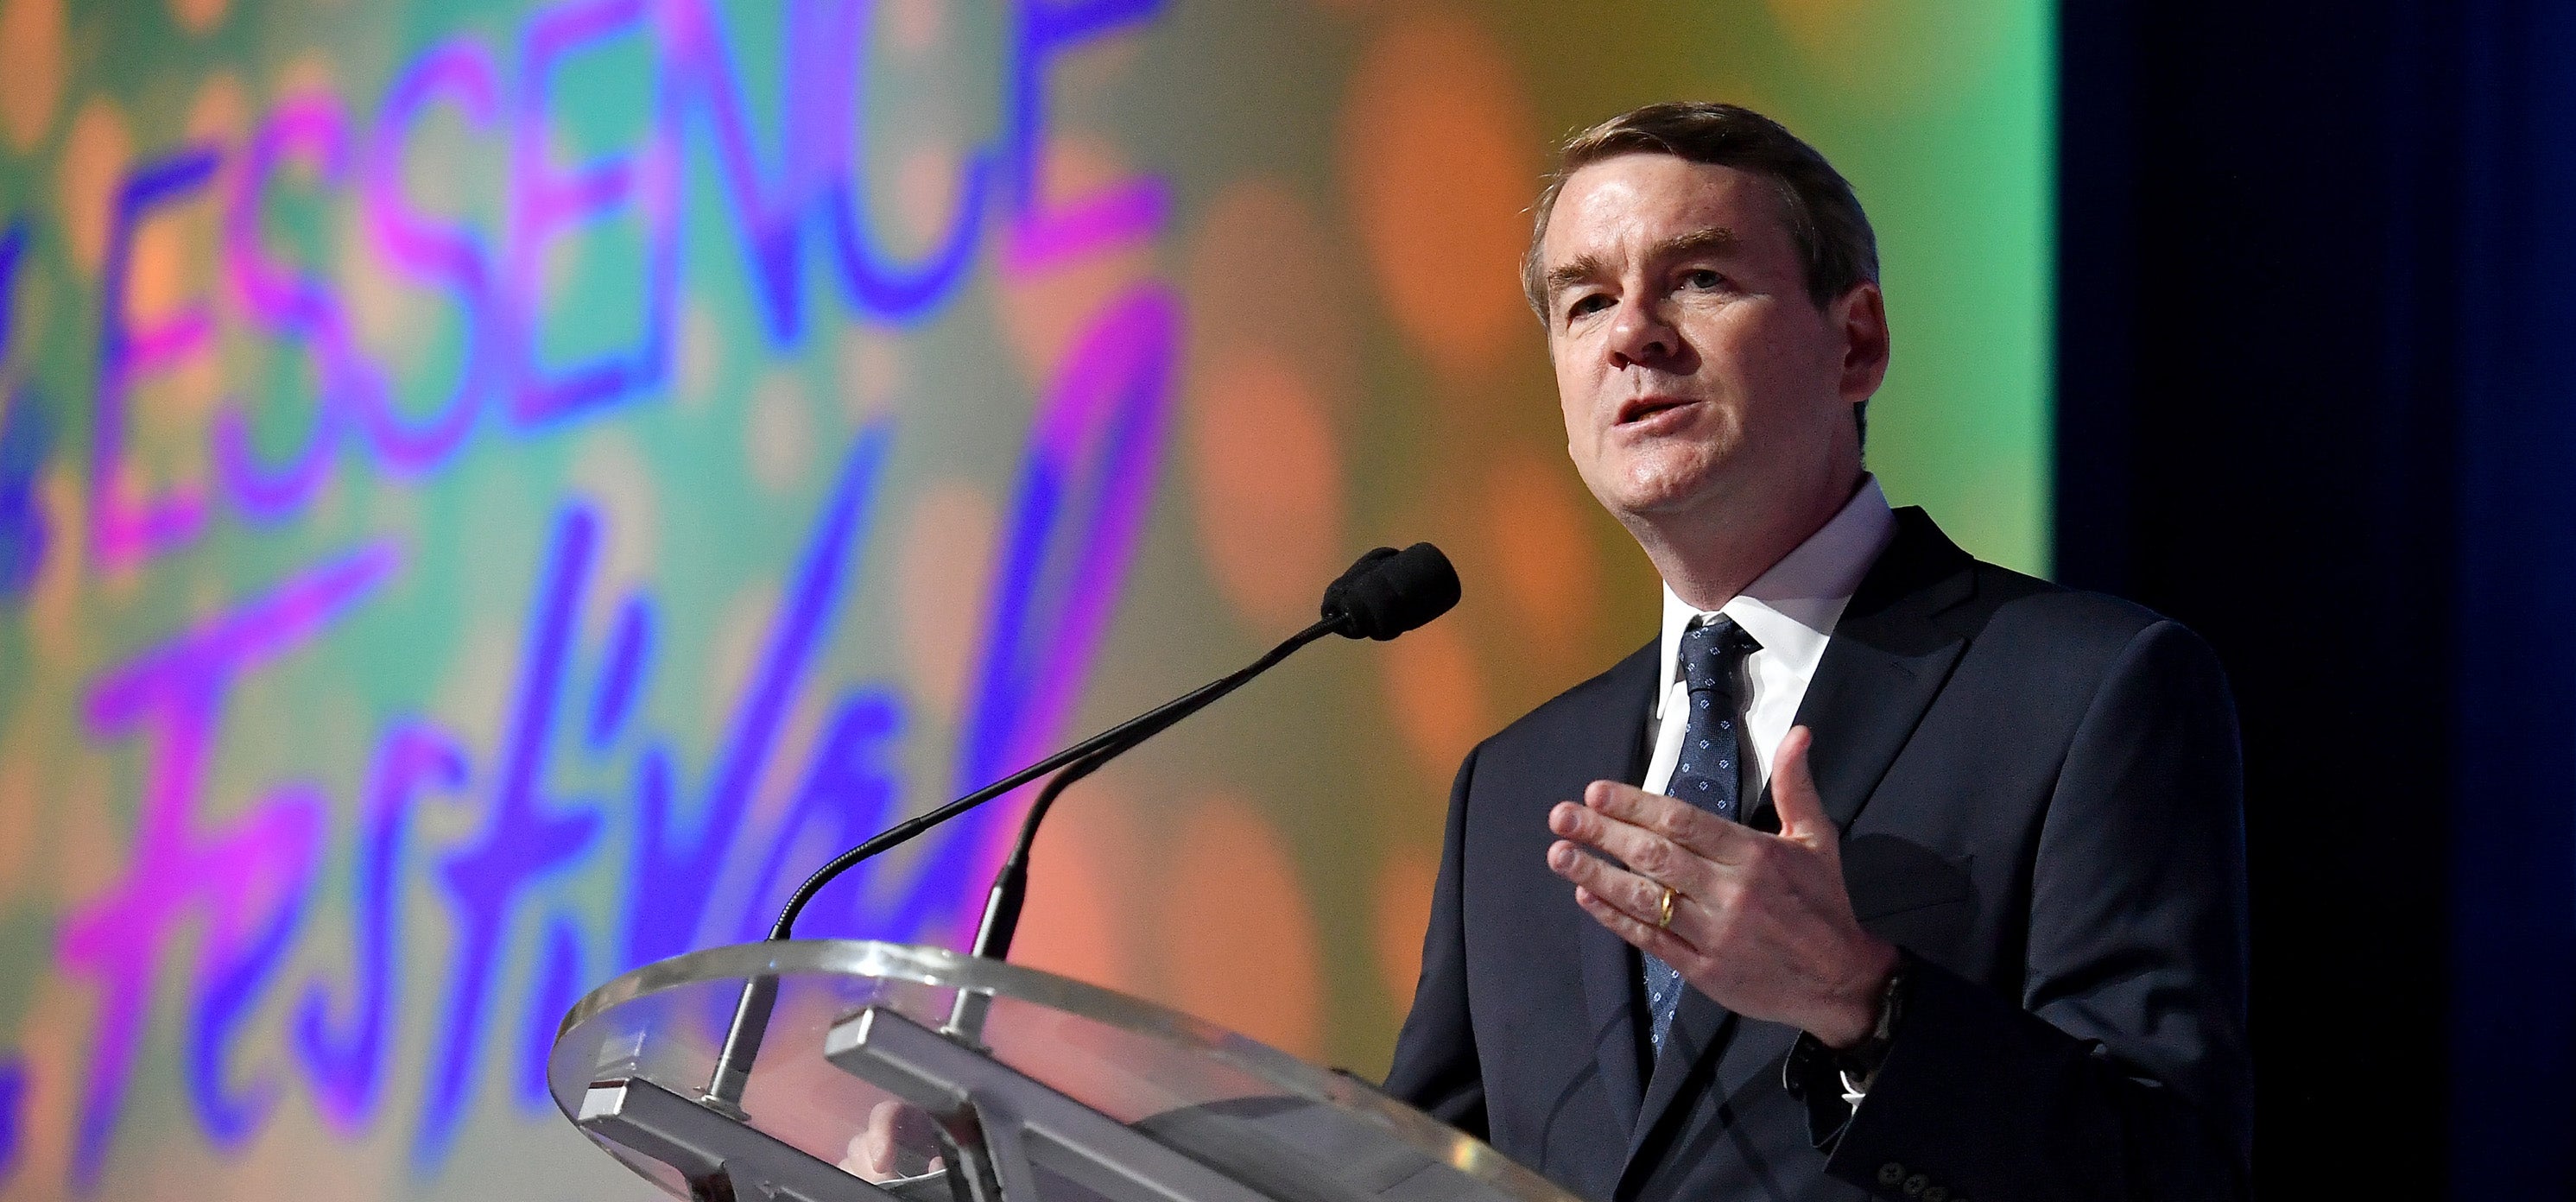 Democratic Candidate Michael Bennet Talks About The Importance Of Equality In Education At ESSENCE Fest